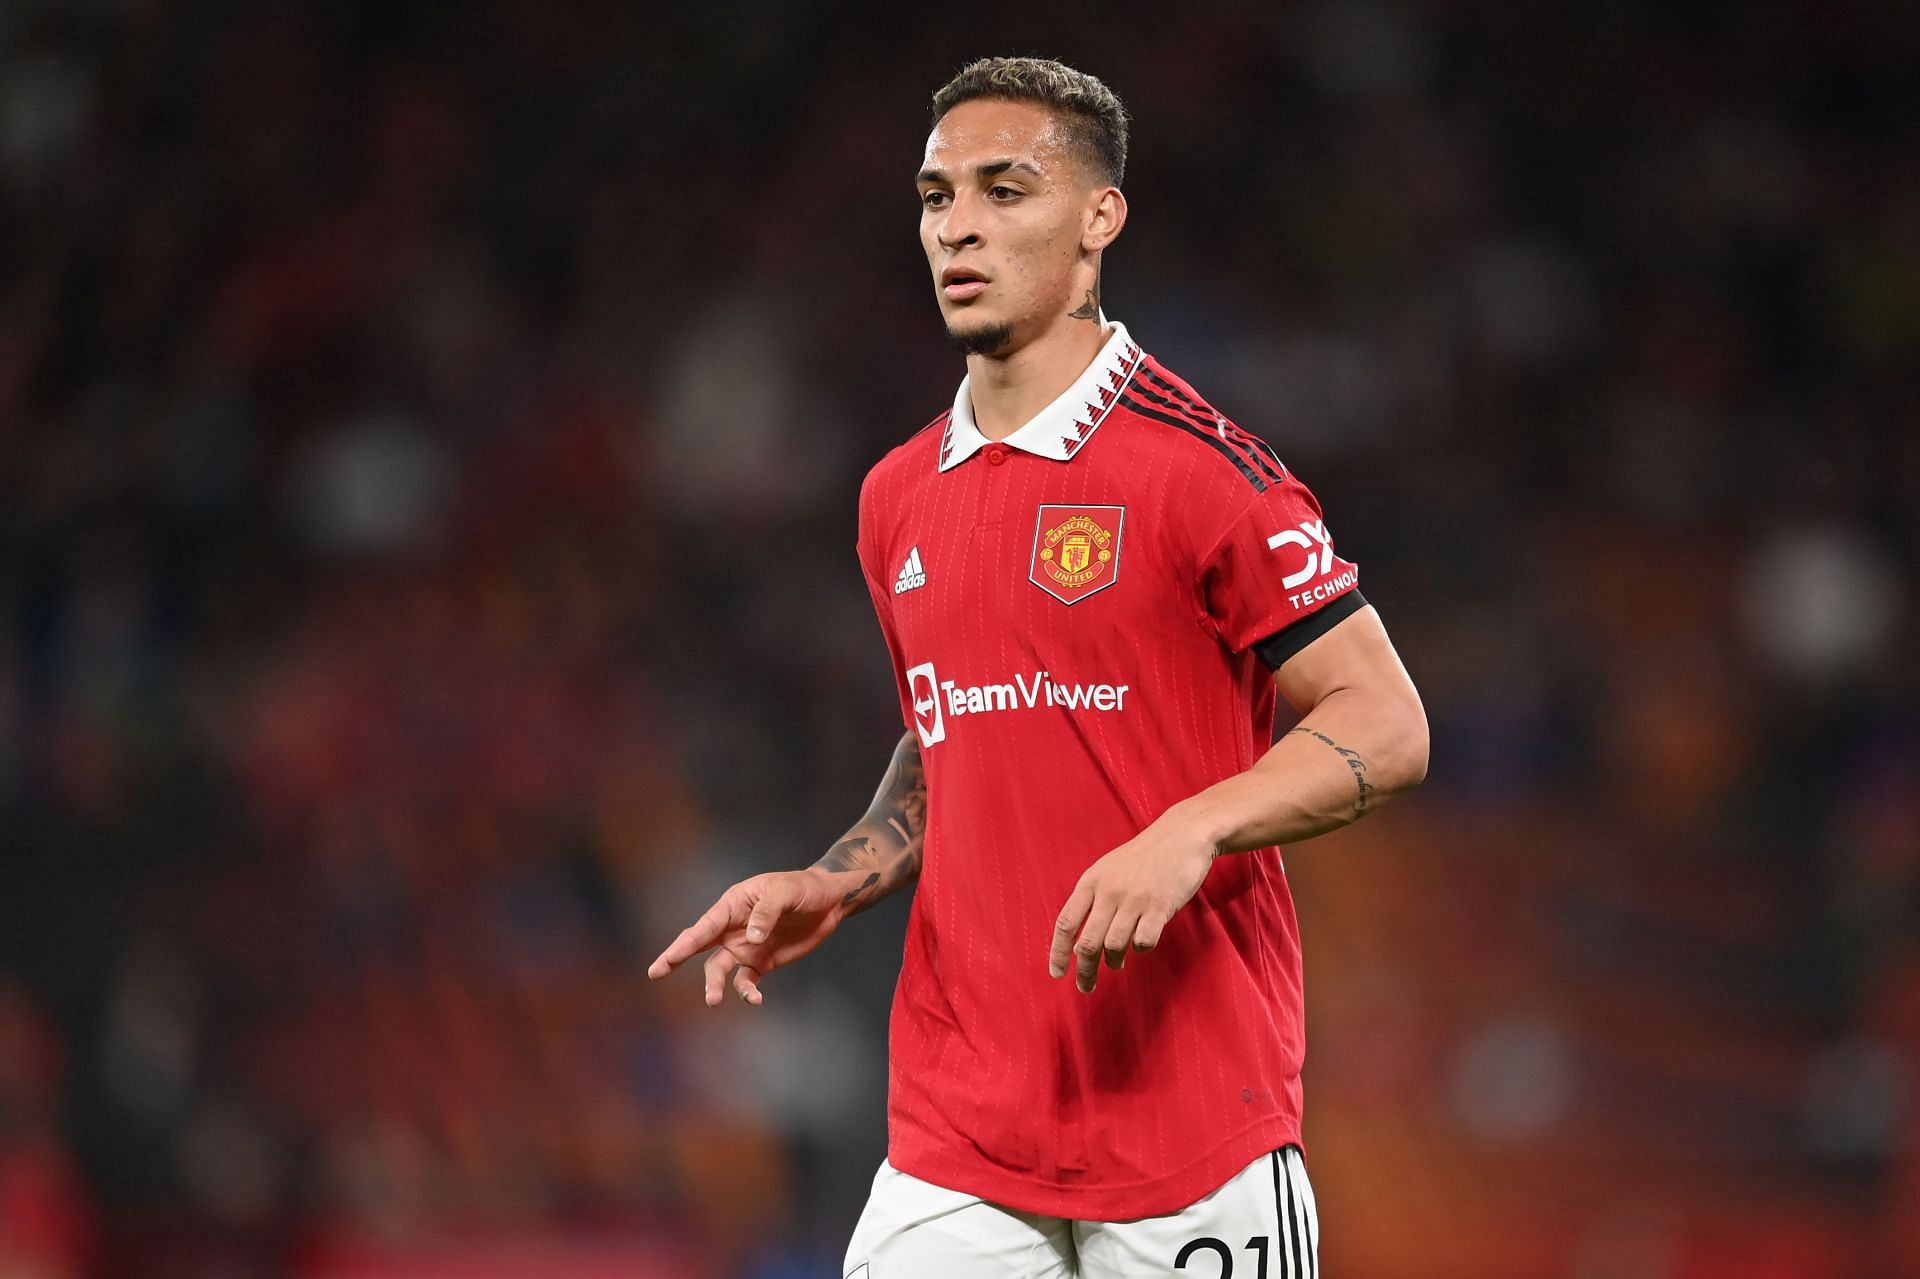 Antony arrived at Manchester United this summer from Ajax